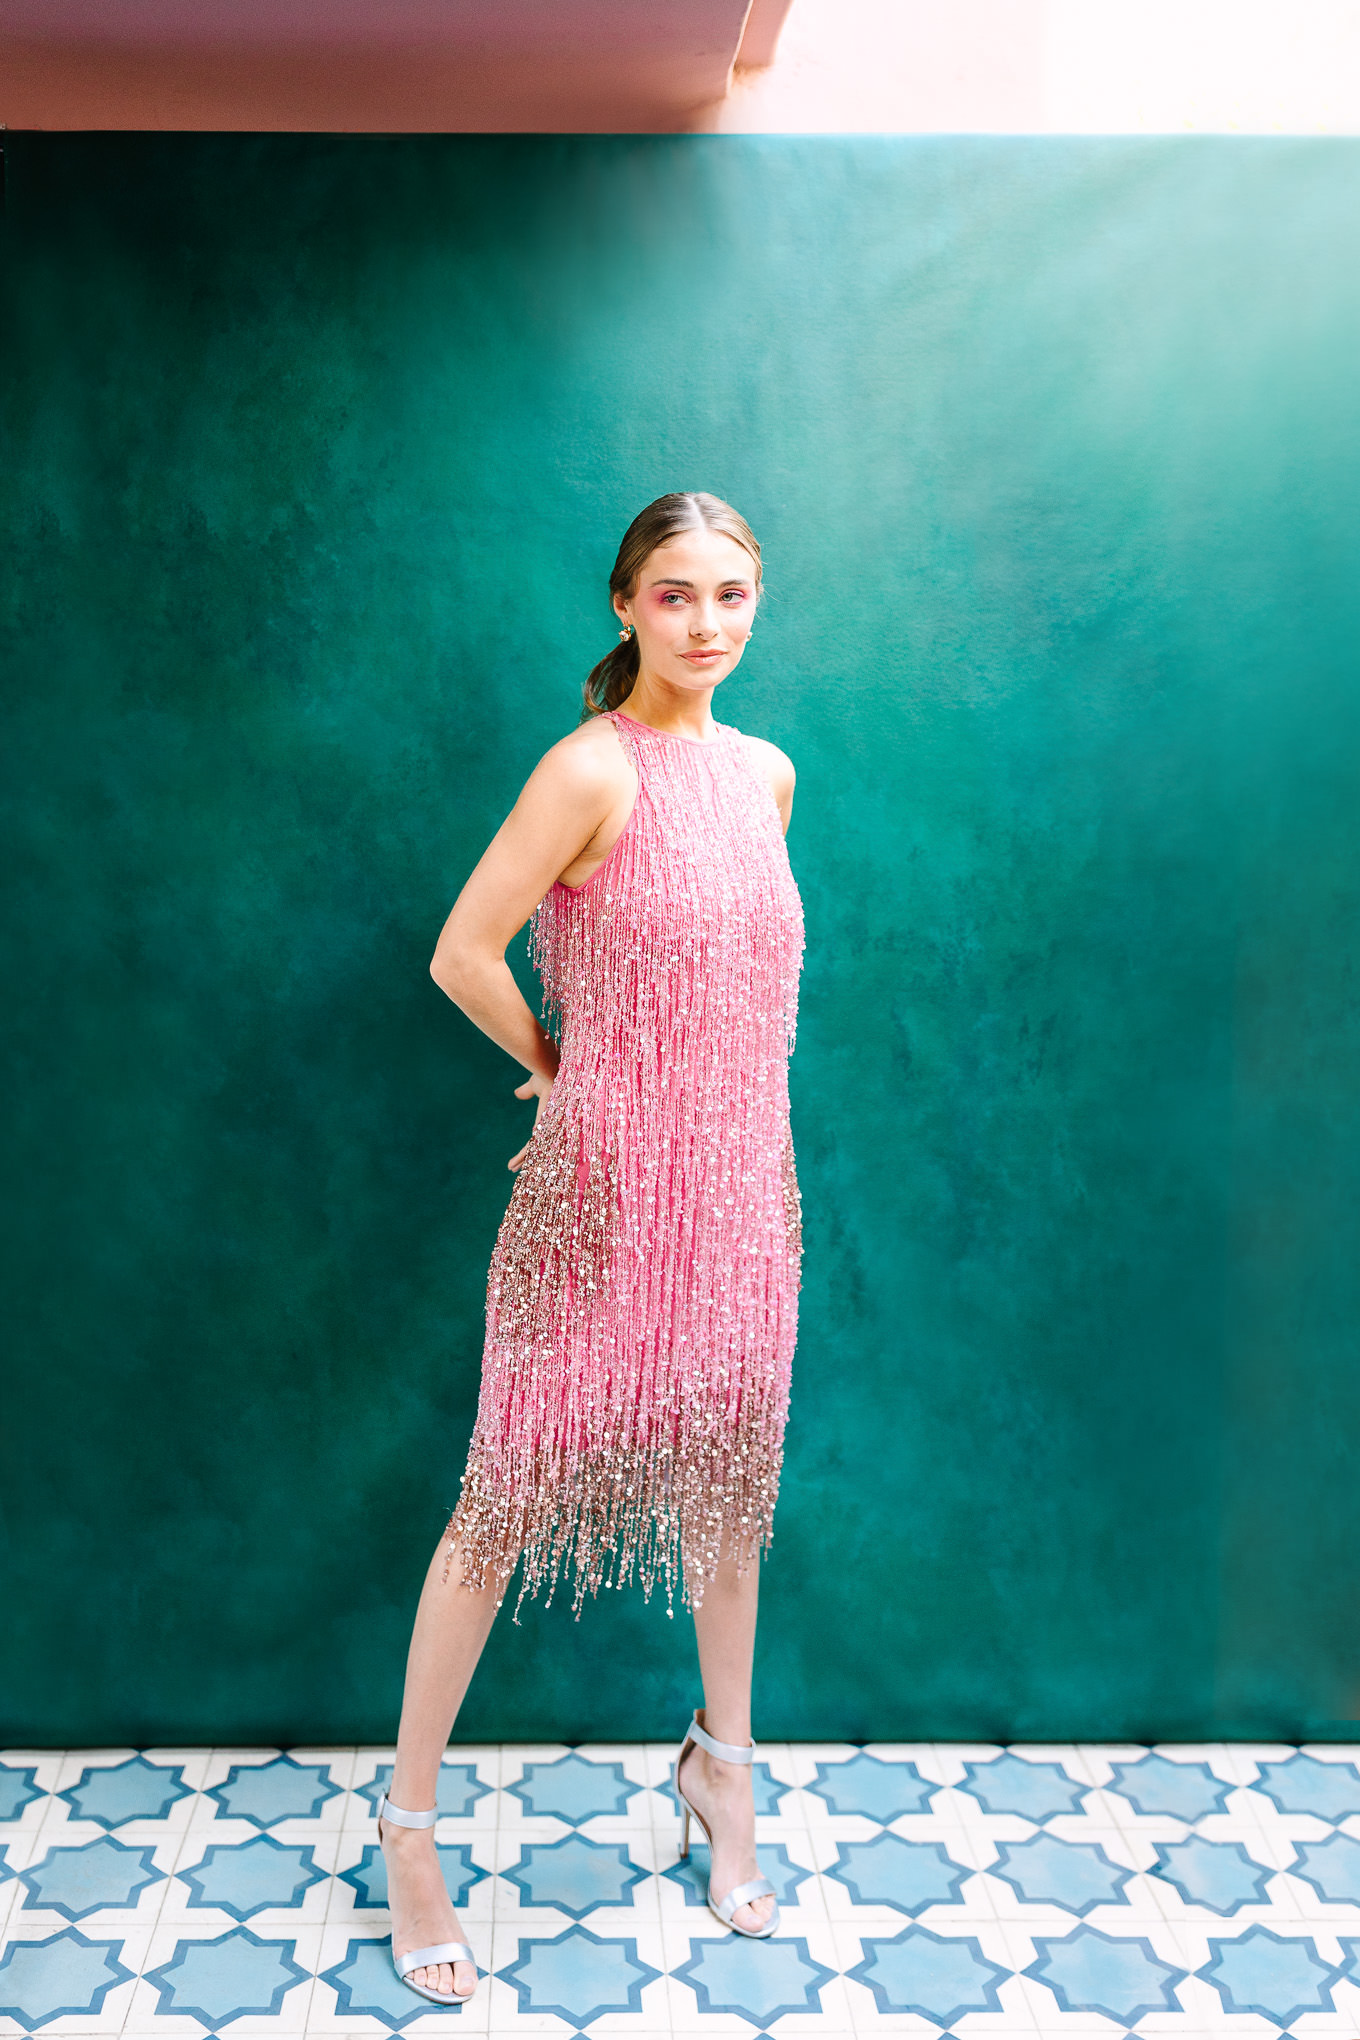 Pink fringe Naeem Khan gown on emerald backdrop | Kindred Presets x Mary Costa Photography Sands Hotel Ad Campaign | Colorful Palm Springs wedding photography | #palmspringsphotographer #lightroompresets #sandshotel #pinkhotel   Source: Mary Costa Photography | Los Angeles